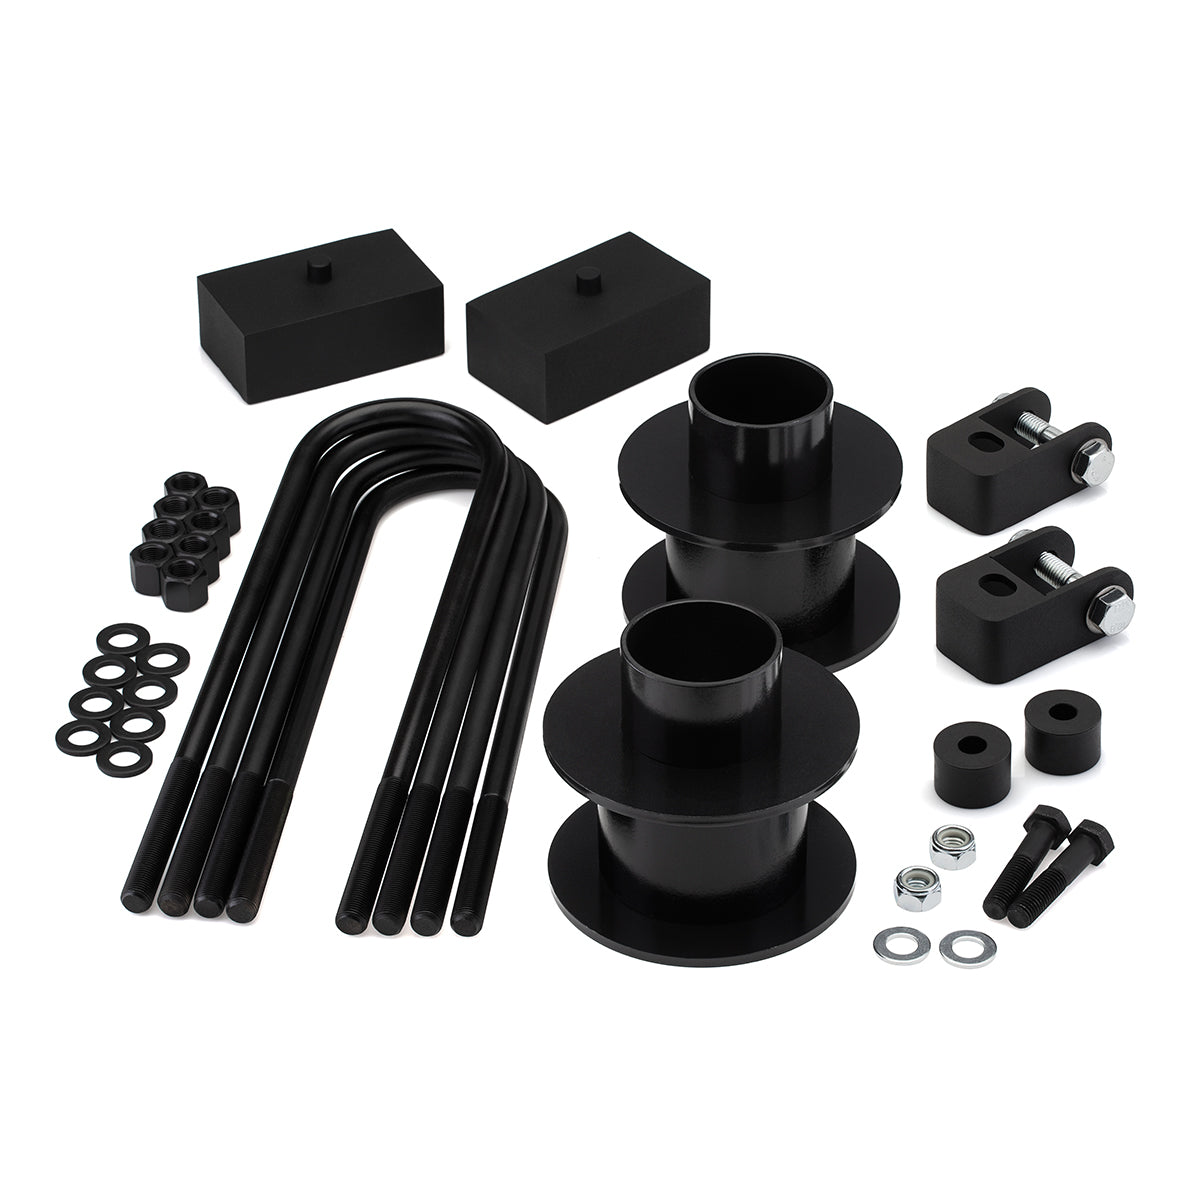 2005-2022 Ford F-250 Full Lift Kit with Bump Stop Drop and Front Shock Extenders